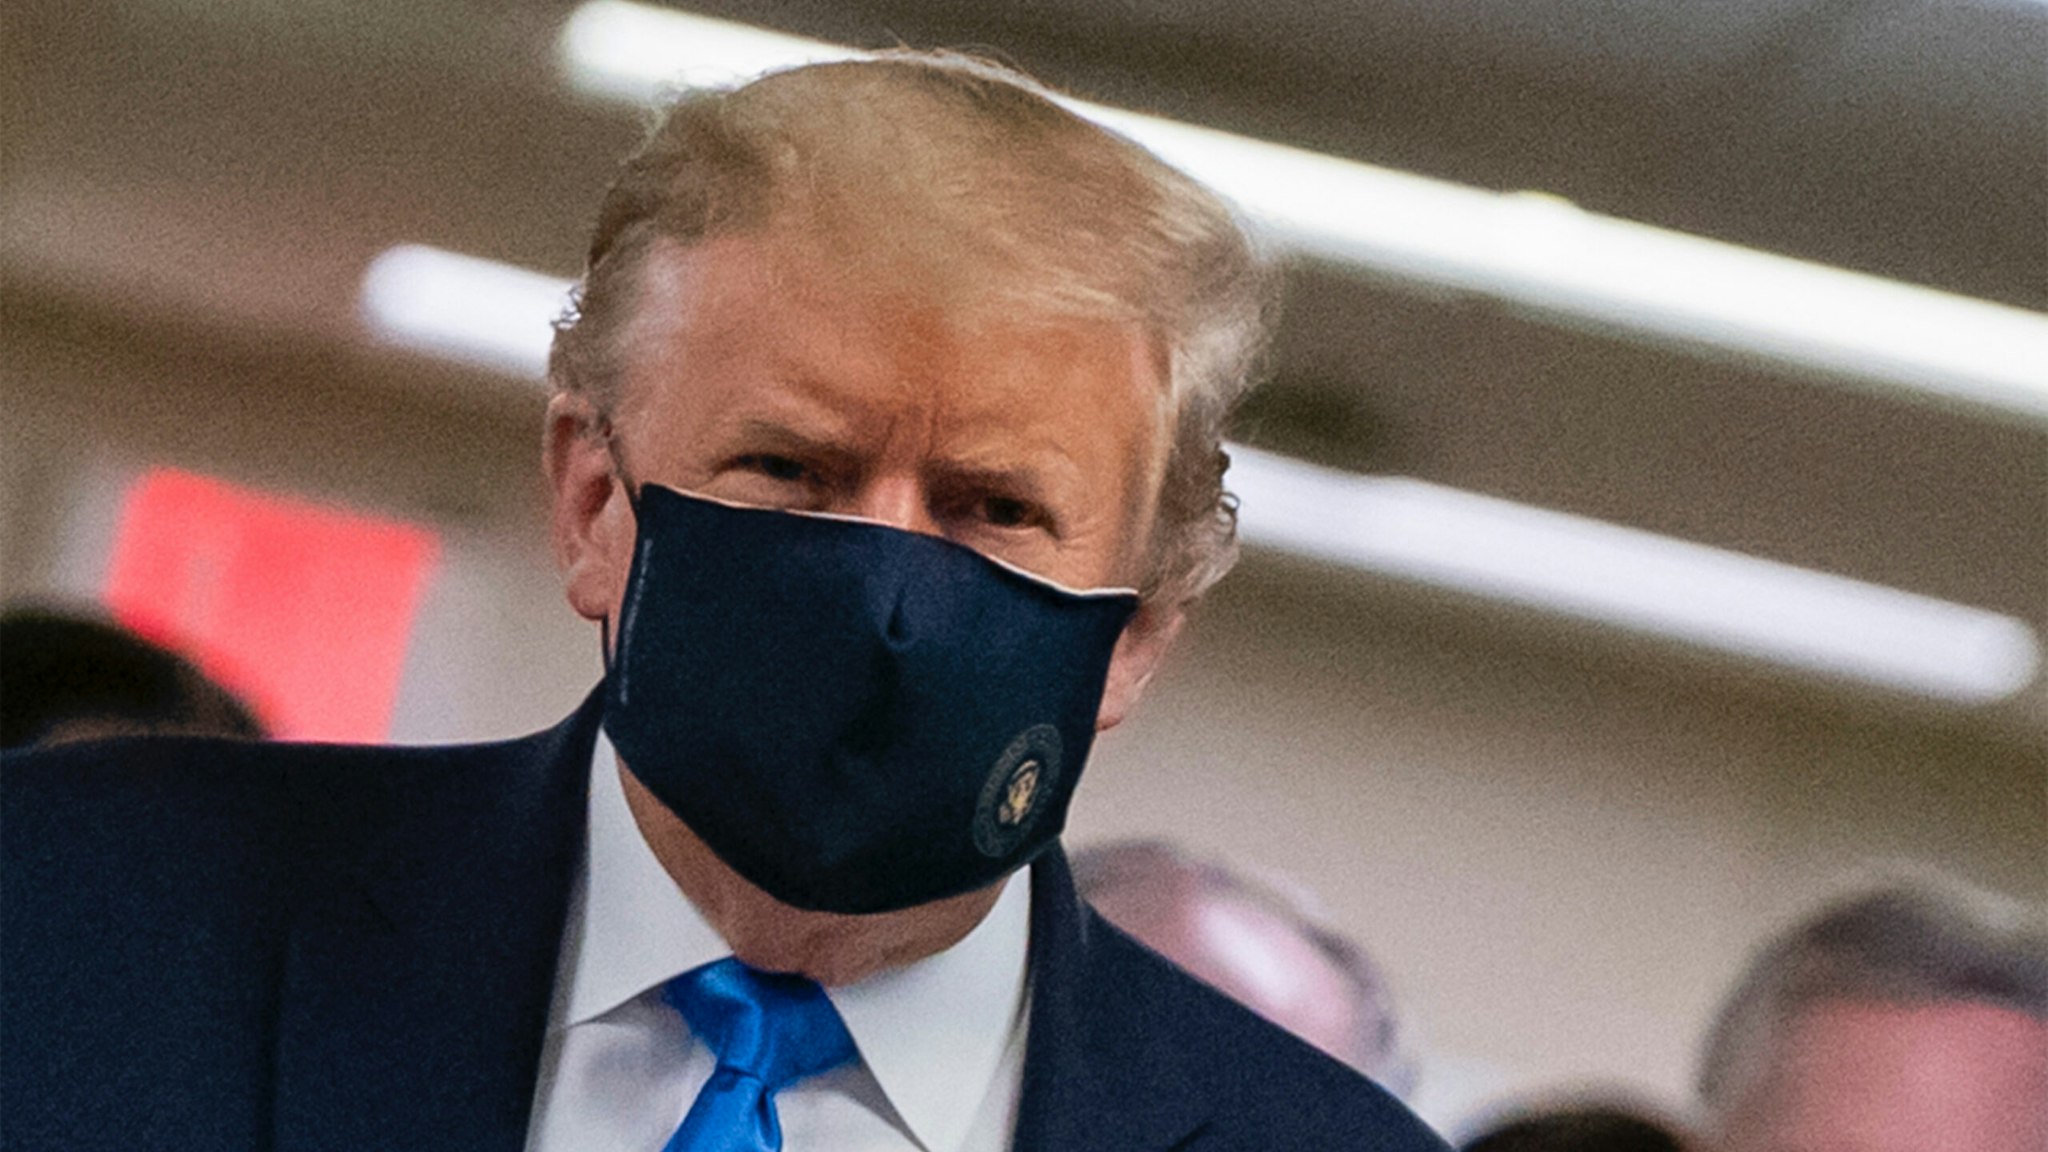 US President Donald Trump wears a mask as he visits Walter Reed National Military Medical Center in Bethesda, Maryland' on July 11, 2020.